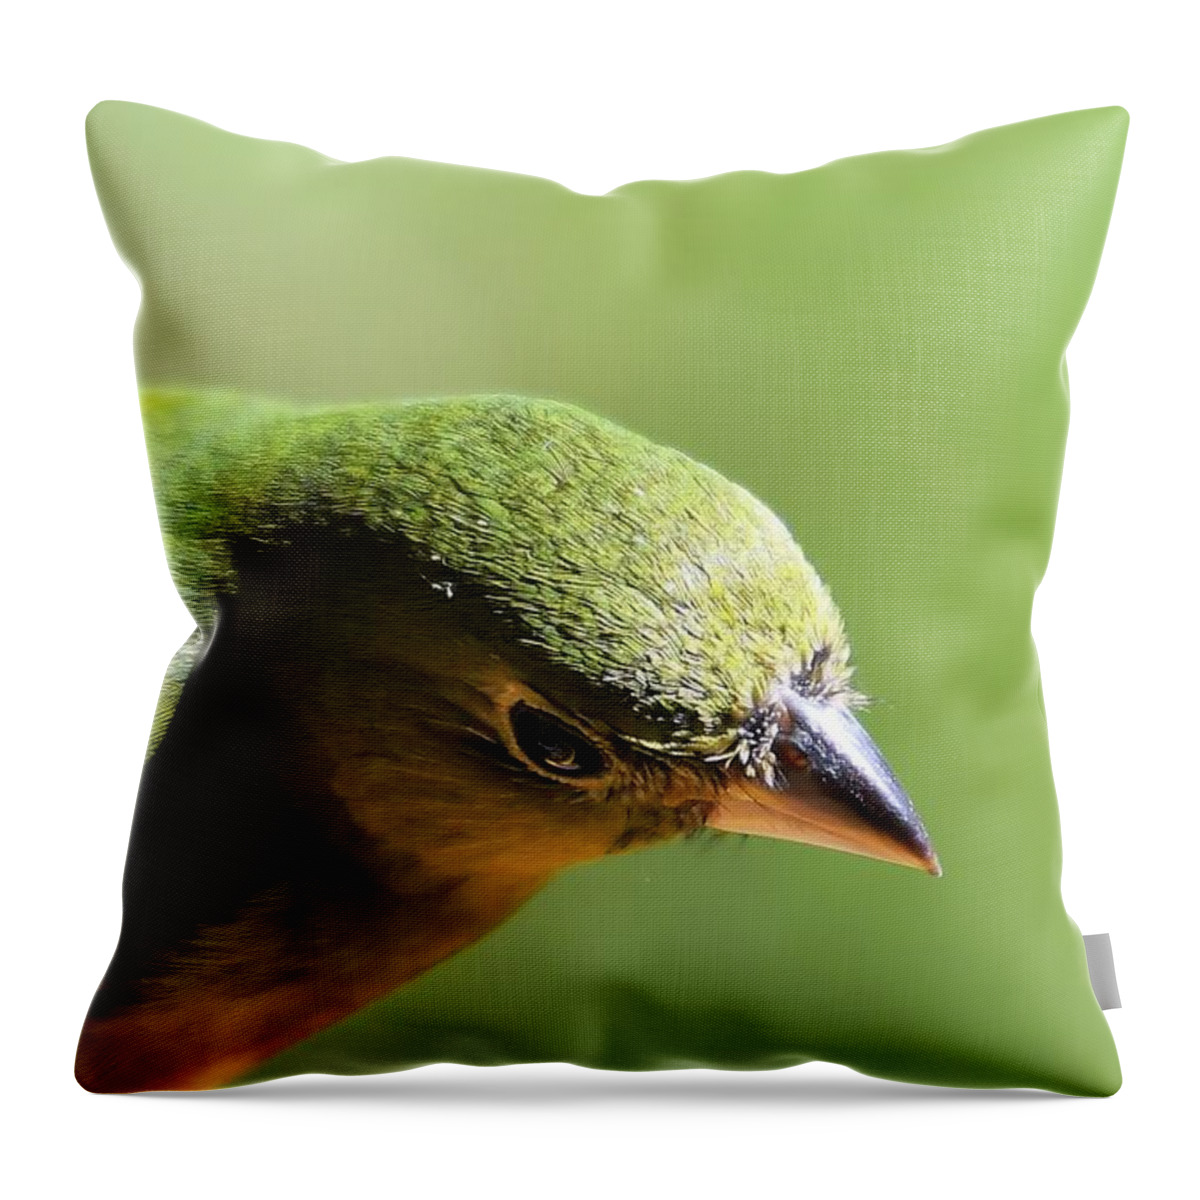 Painted Bunting Throw Pillow featuring the photograph I See Green A Painted Bunting by T Lynn Dodsworth